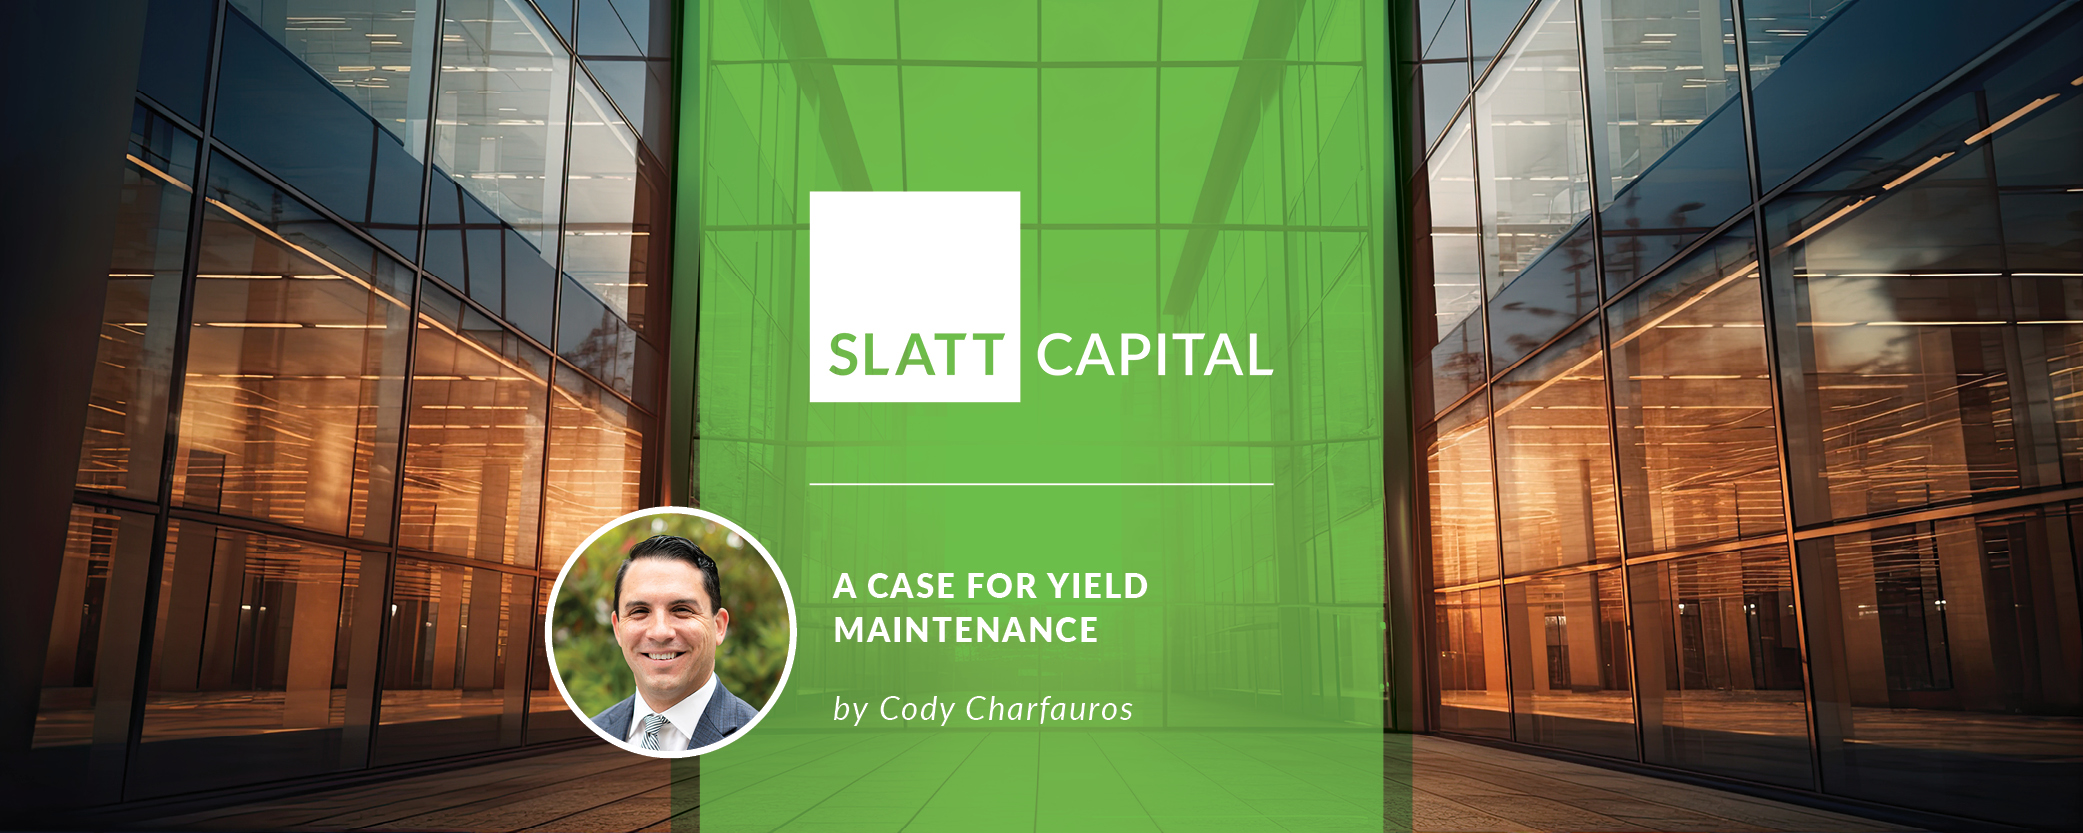 A case for yield maintenance